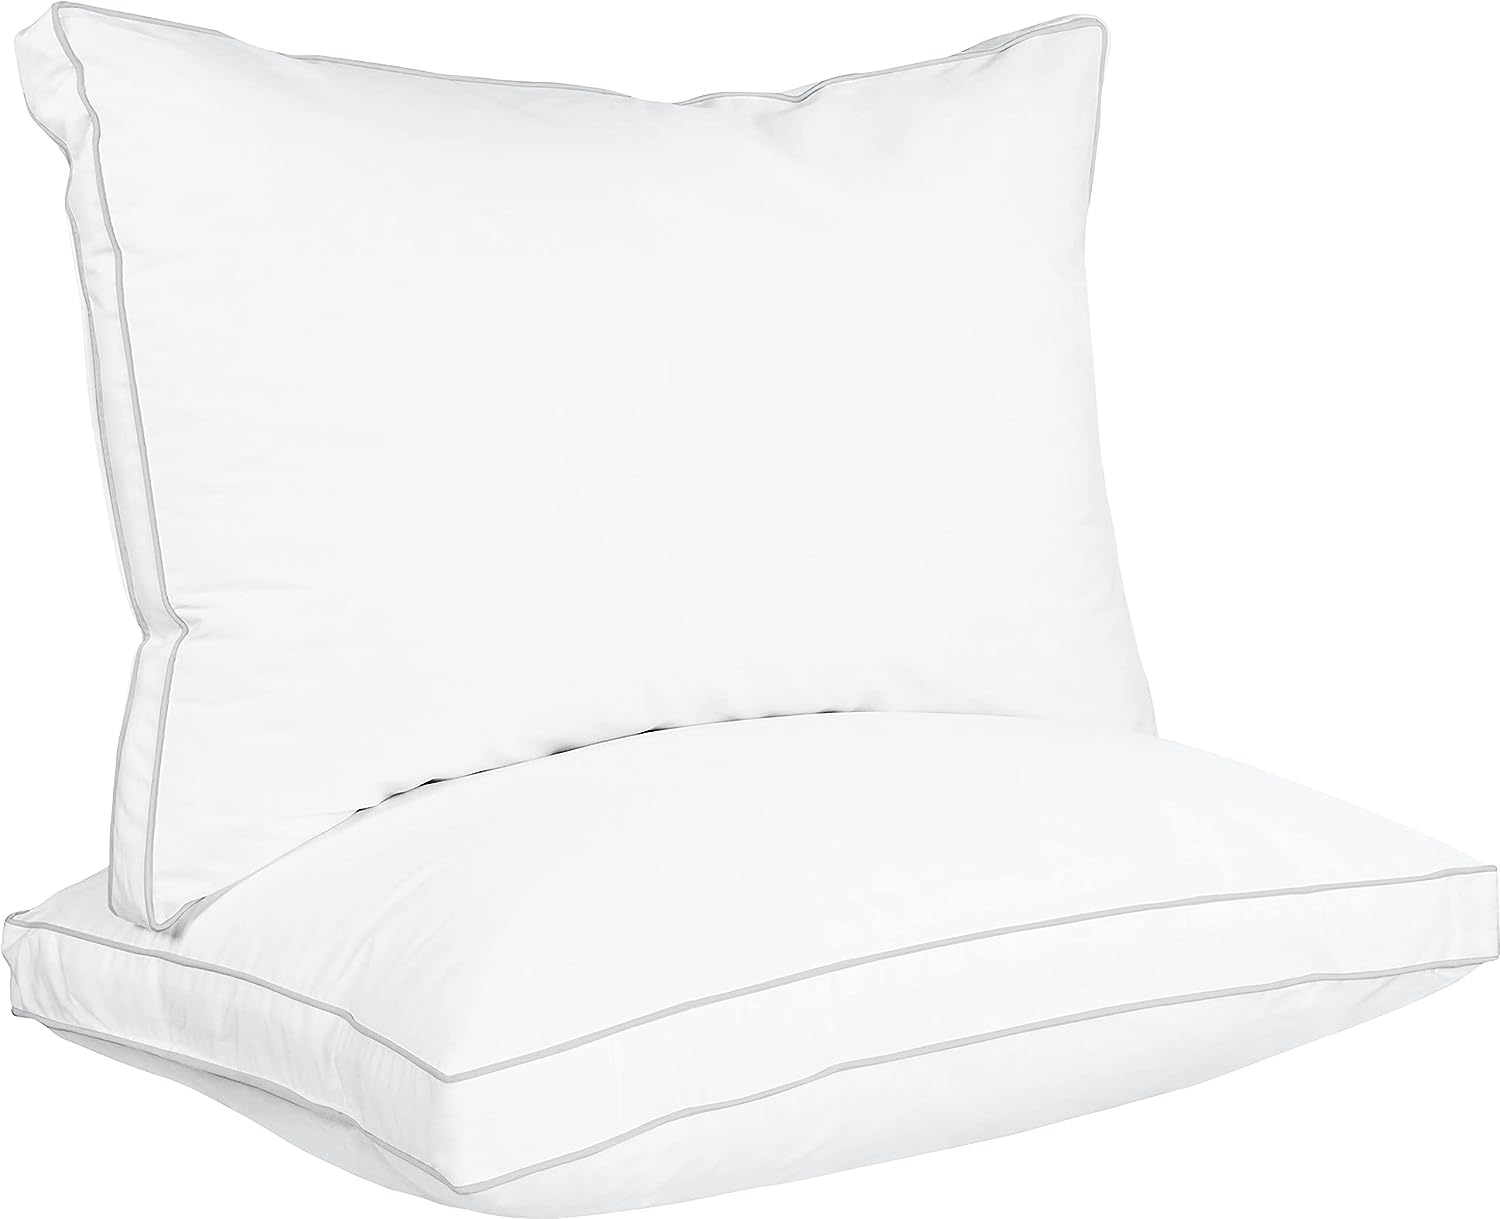  Utopia Bedding Throw Pillows Insert (Pack of 2, White) - 24 x  24 Inches Bed and Couch Pillows - Indoor Decorative Pillows : Home & Kitchen